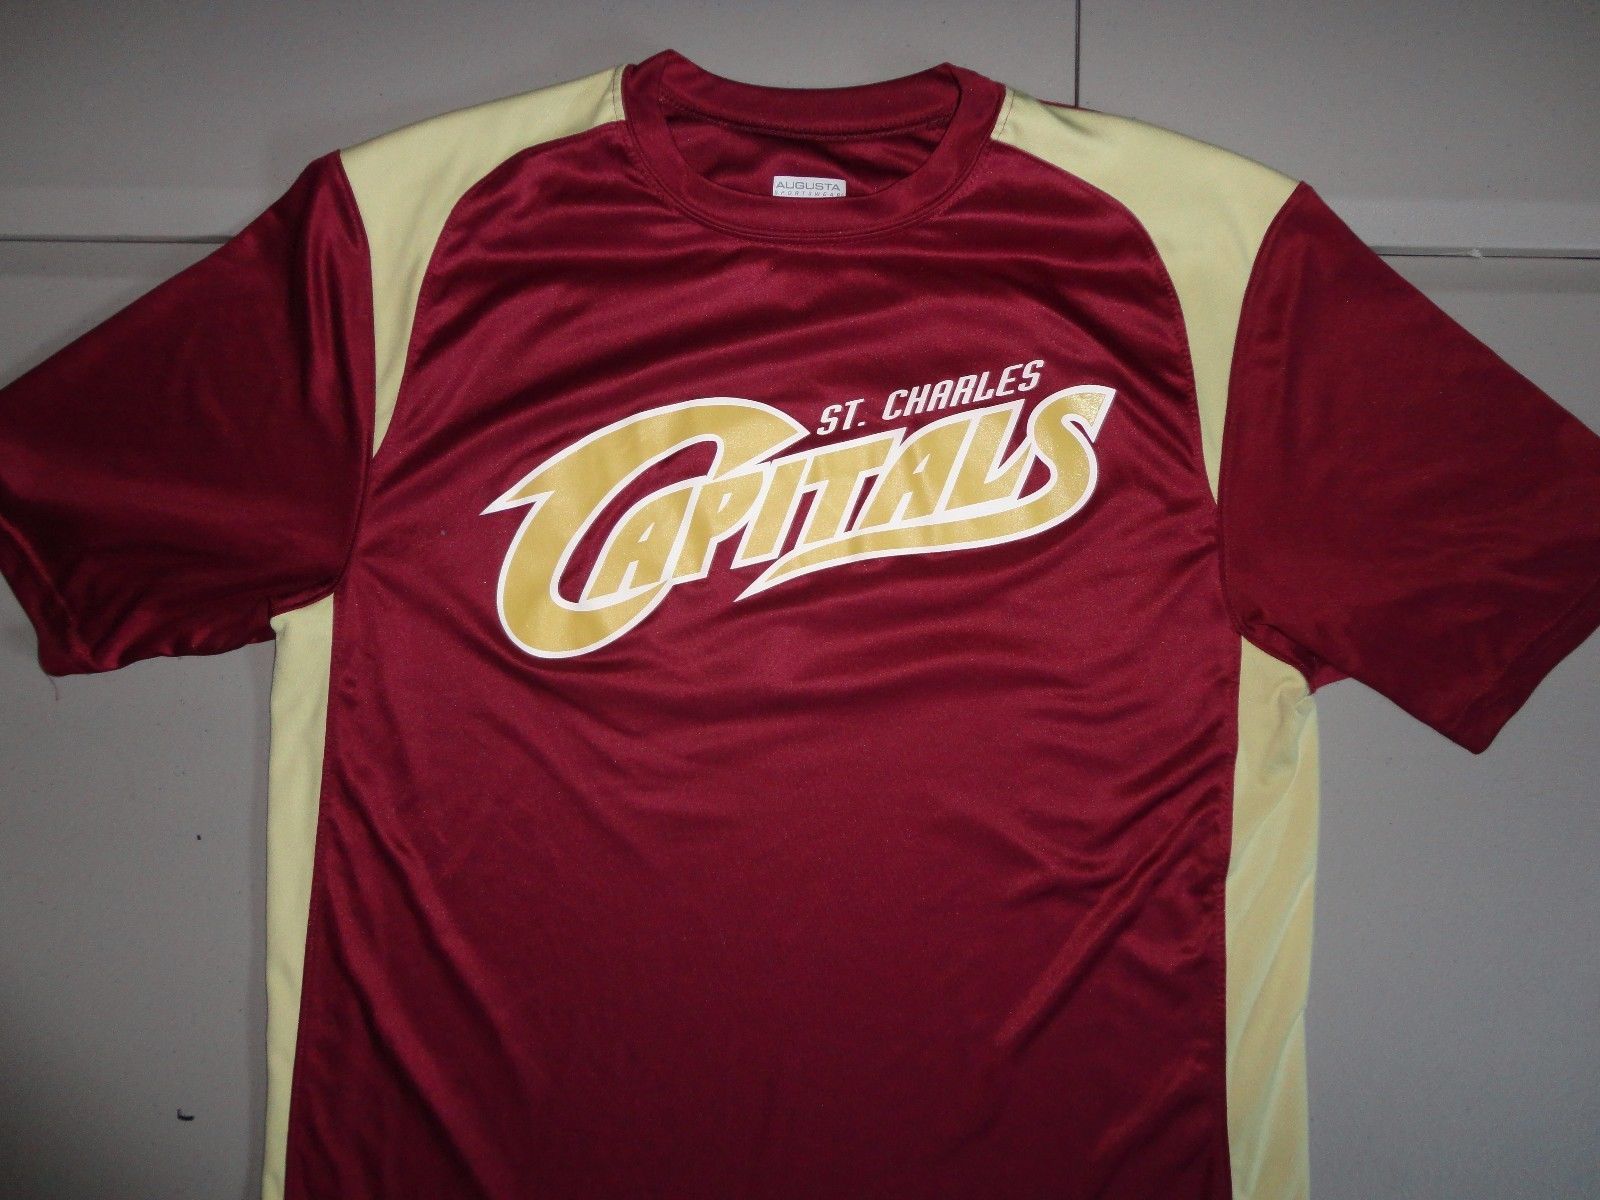 Primary image for Maroon #3 St. Charles Capitals Premier League Baseball Jersey Adult M Excellent